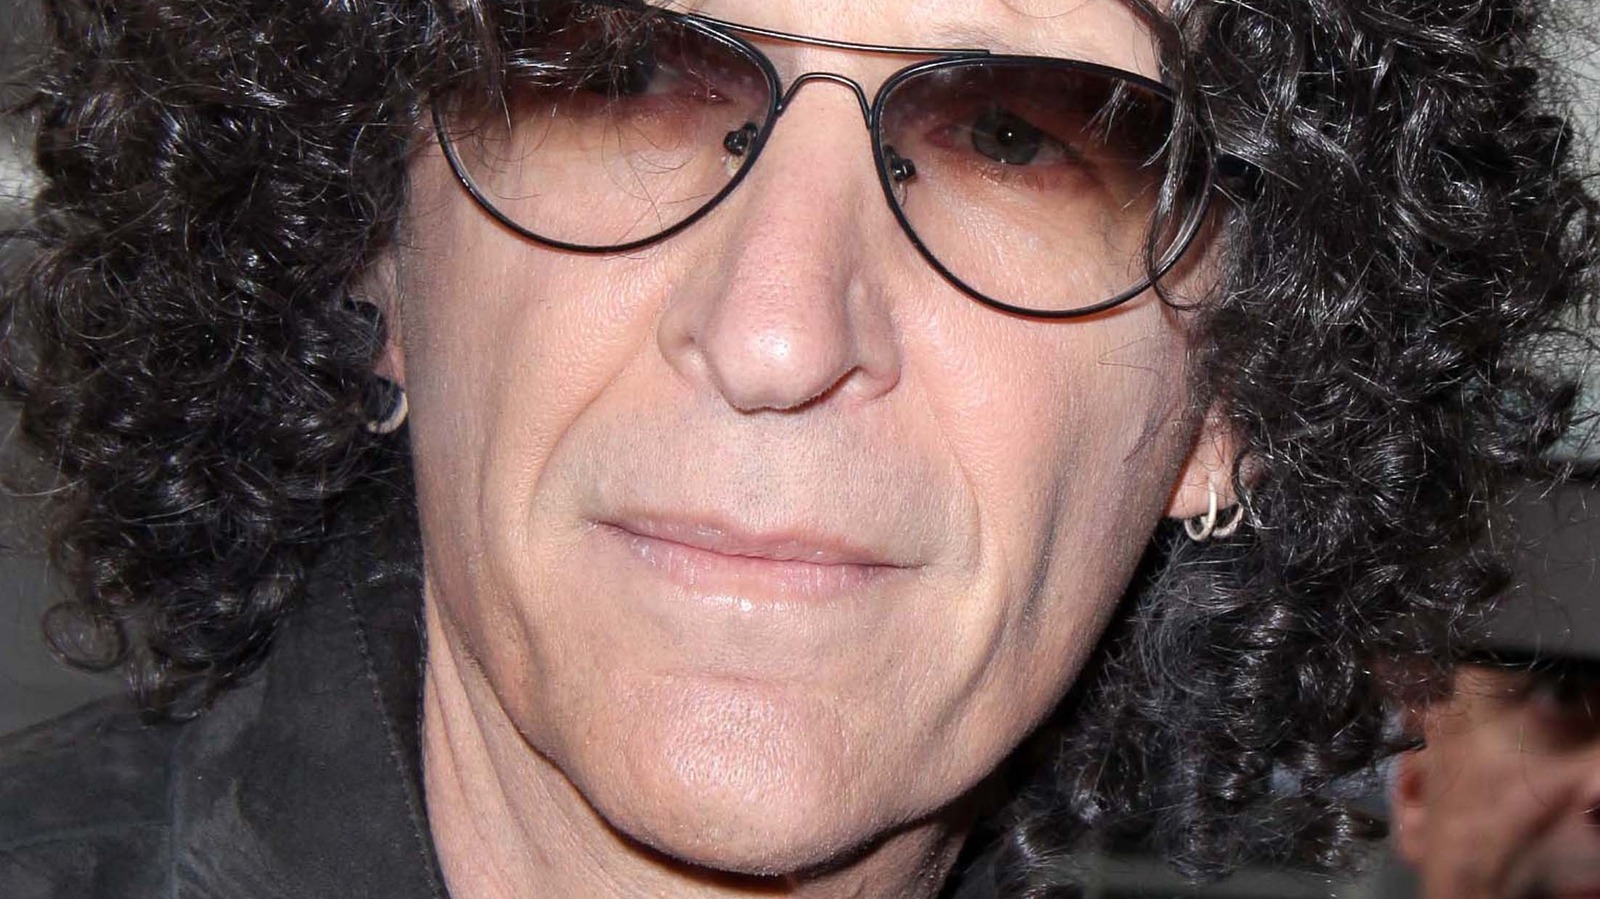 What did Howard Stern say about running for president in the future?